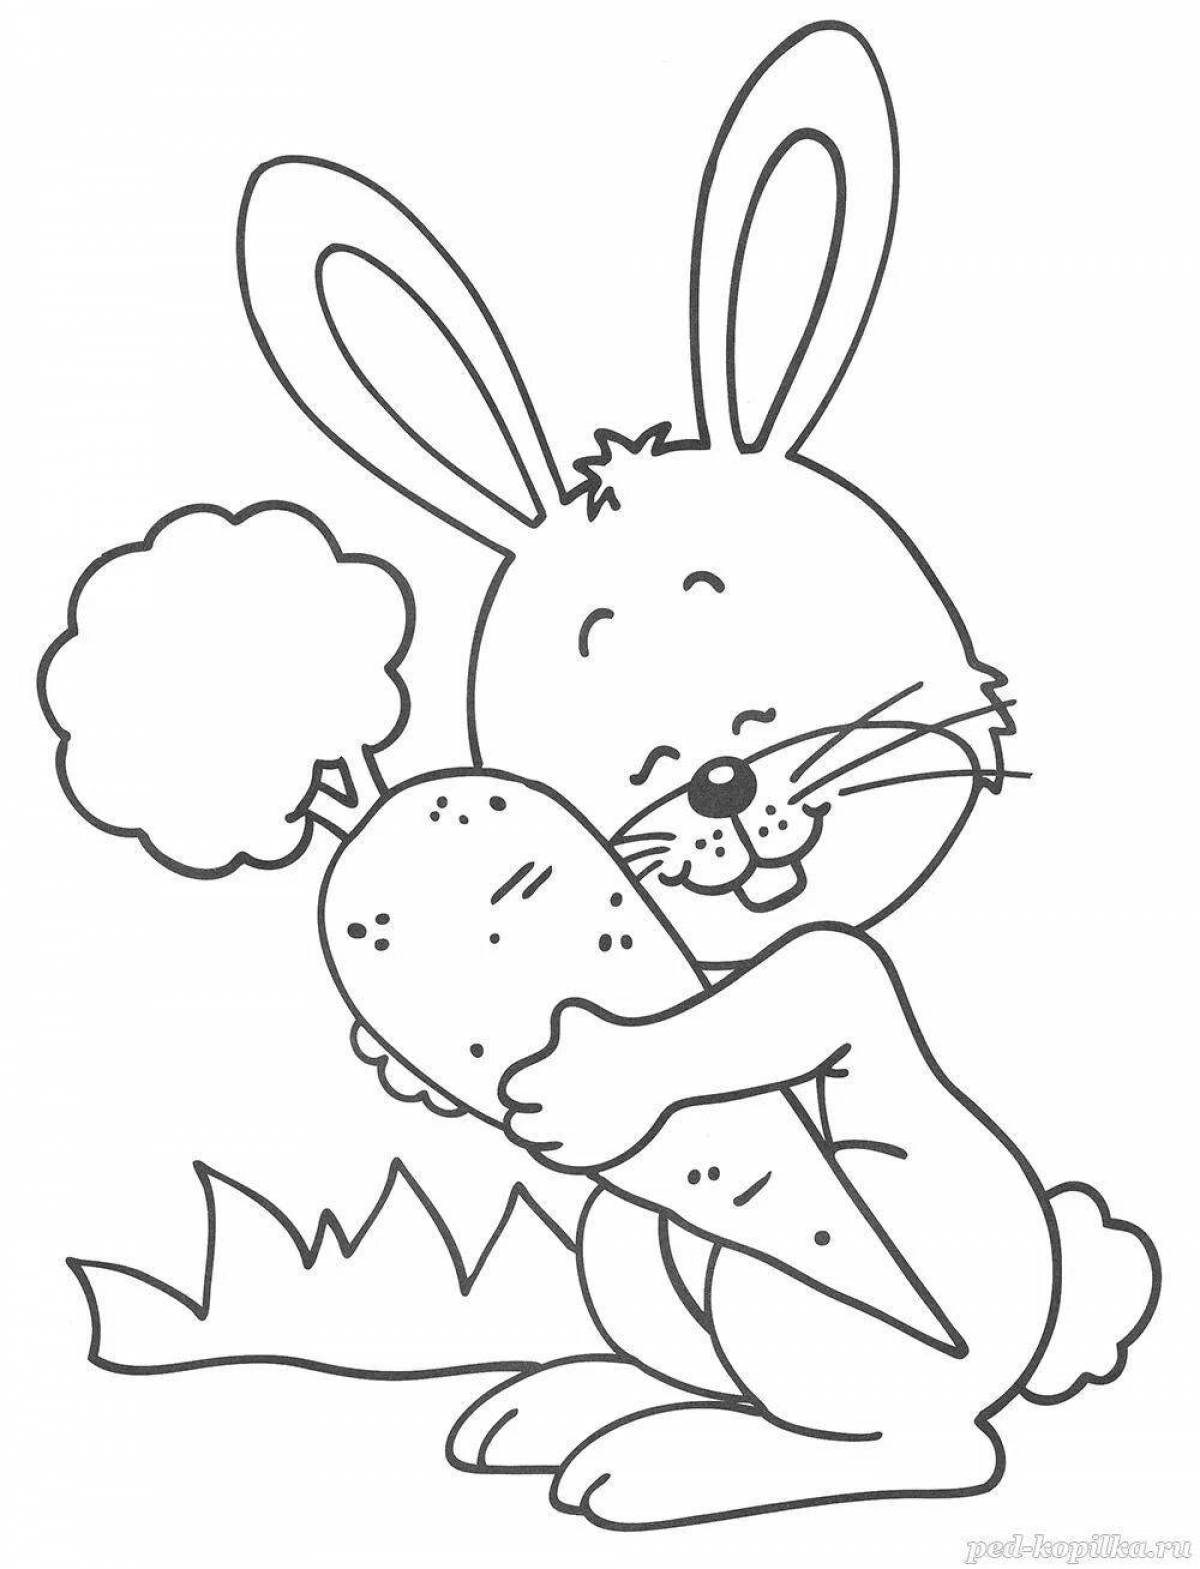 Adorable hare coloring page for 3 year olds